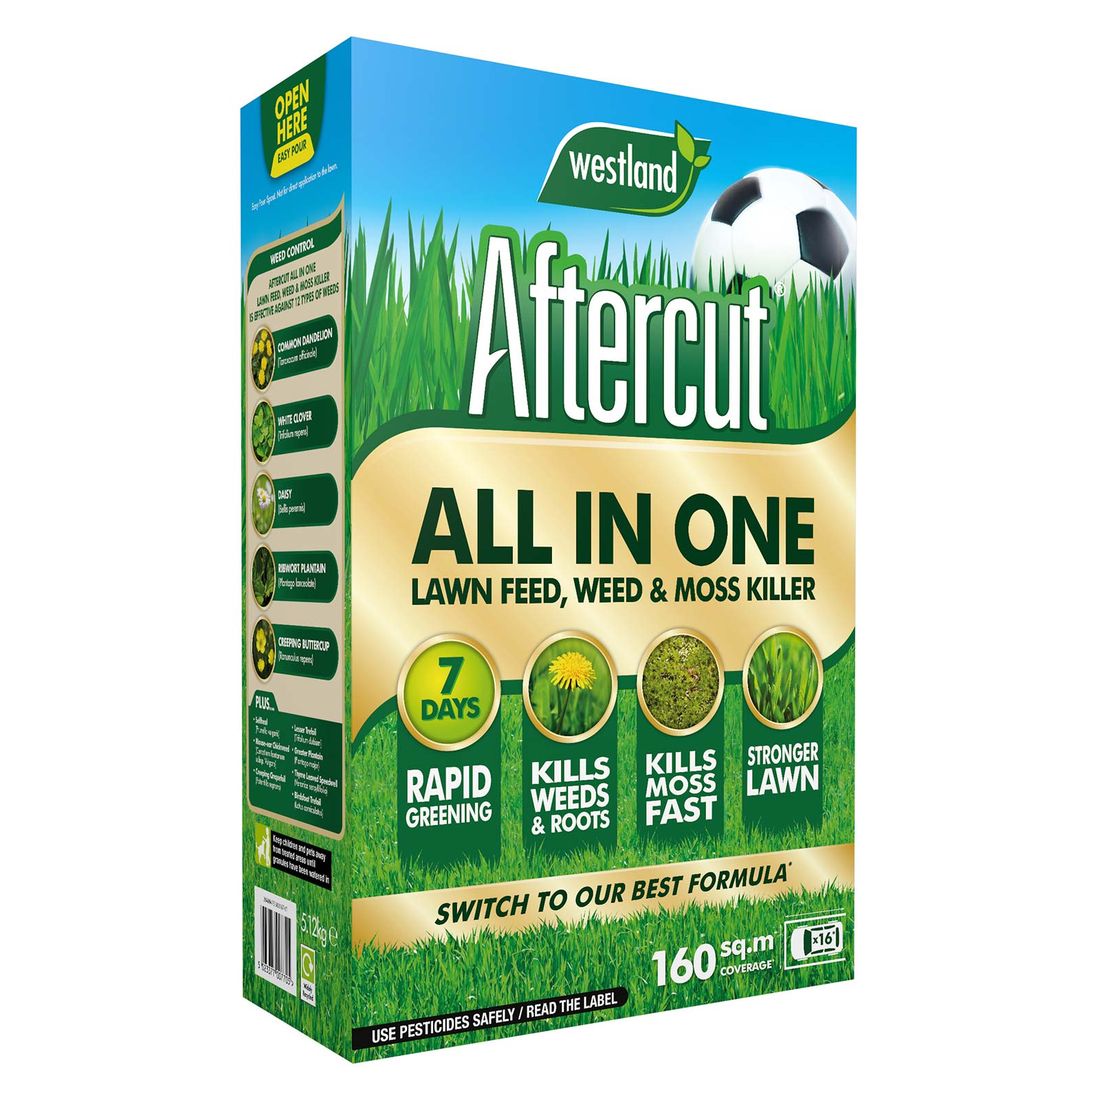 Aftercut Aio Large Box 160M2 Lawn Feed Weed Moss Killer